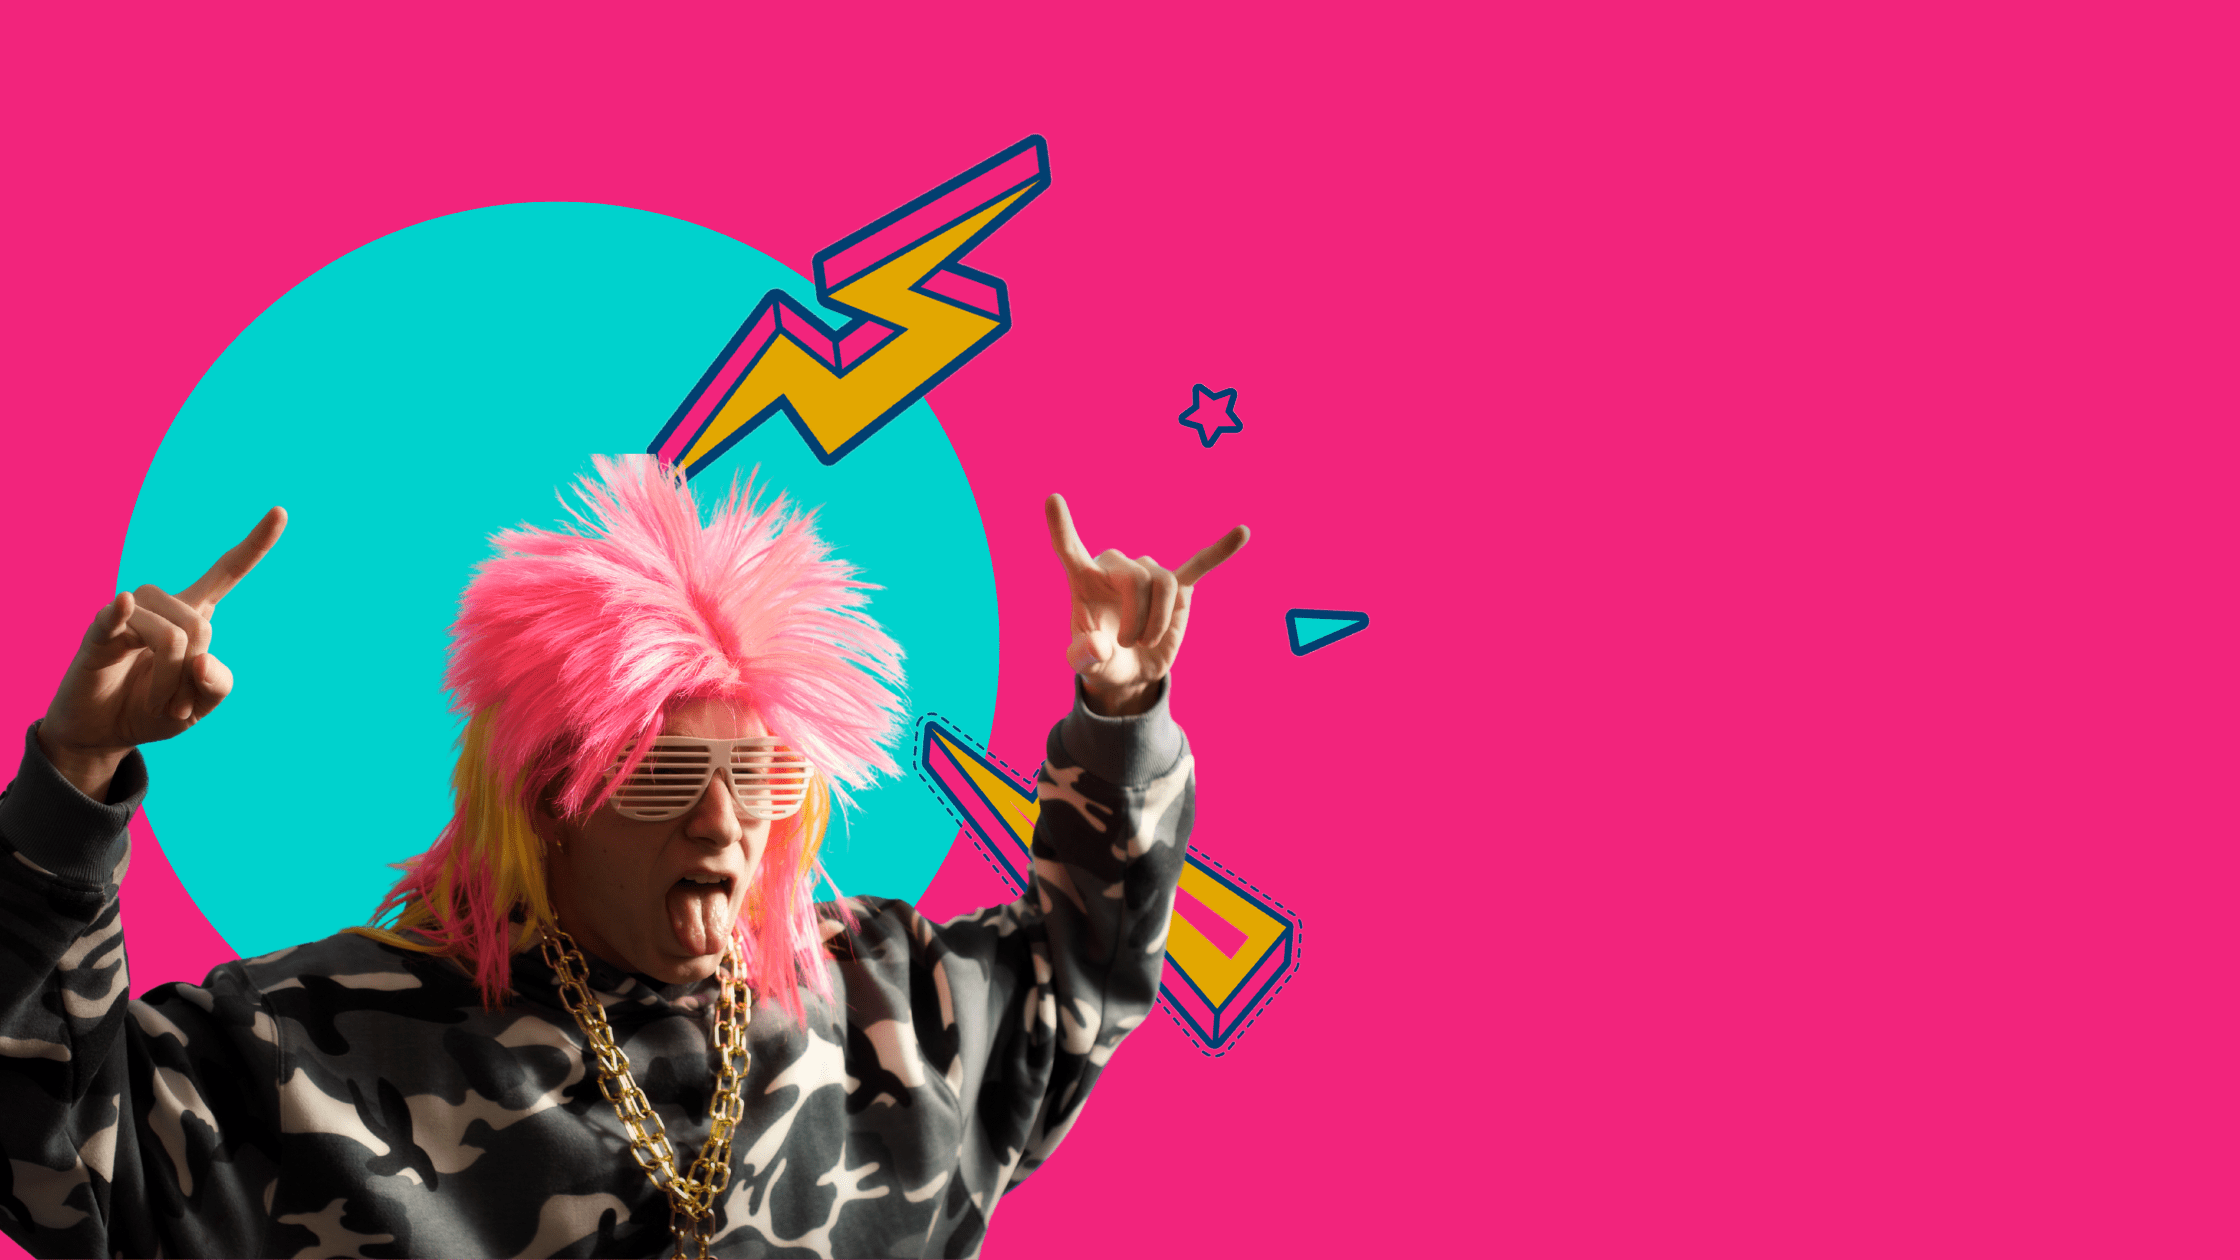 person in pink wig making rockstar symbol with hands